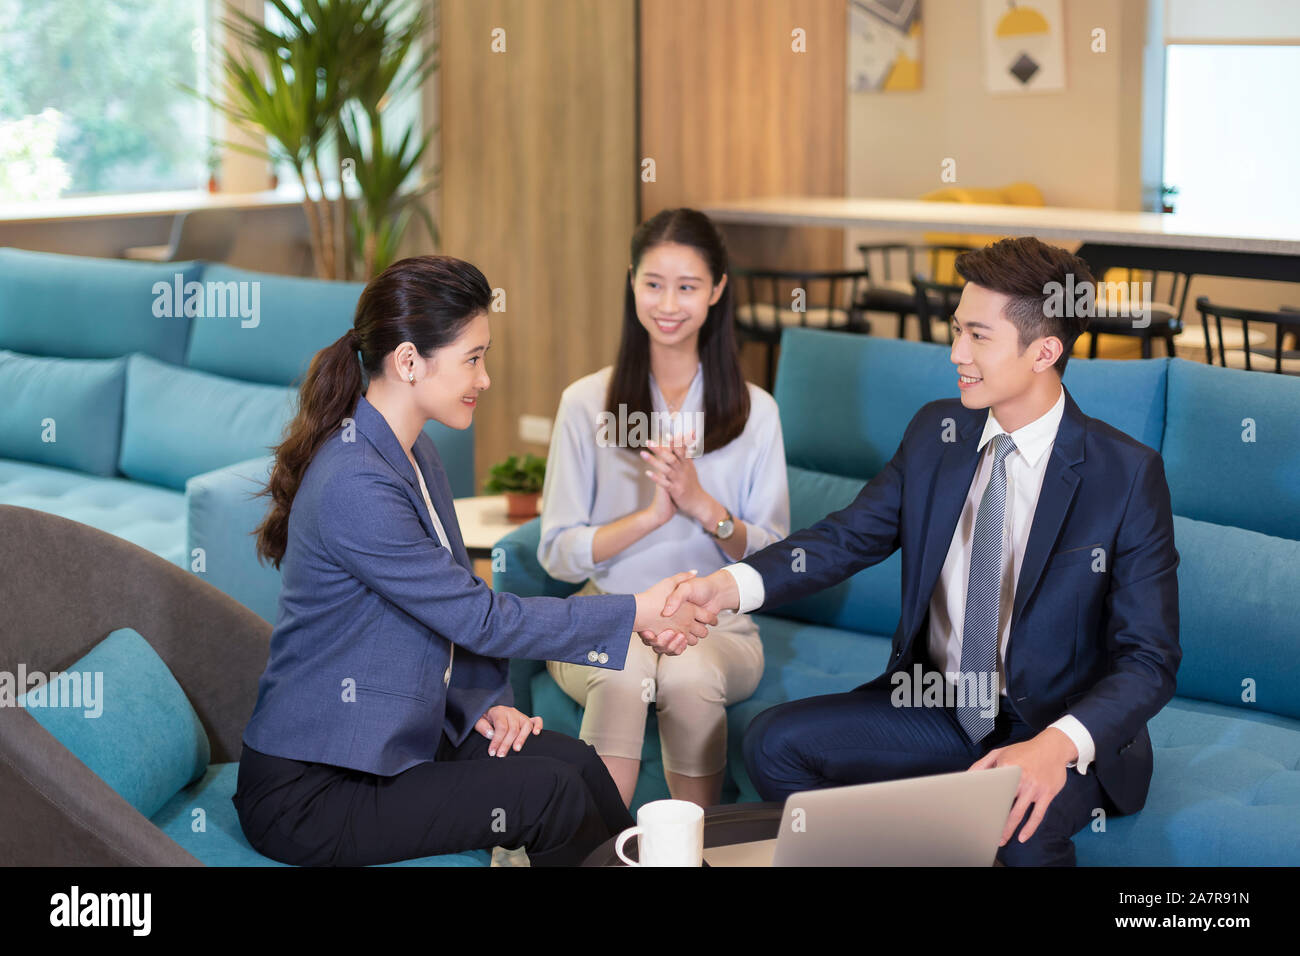 Photograph with three male and female businesspeople wearing businesswear with two of them shaking hands in an office Stock Photo